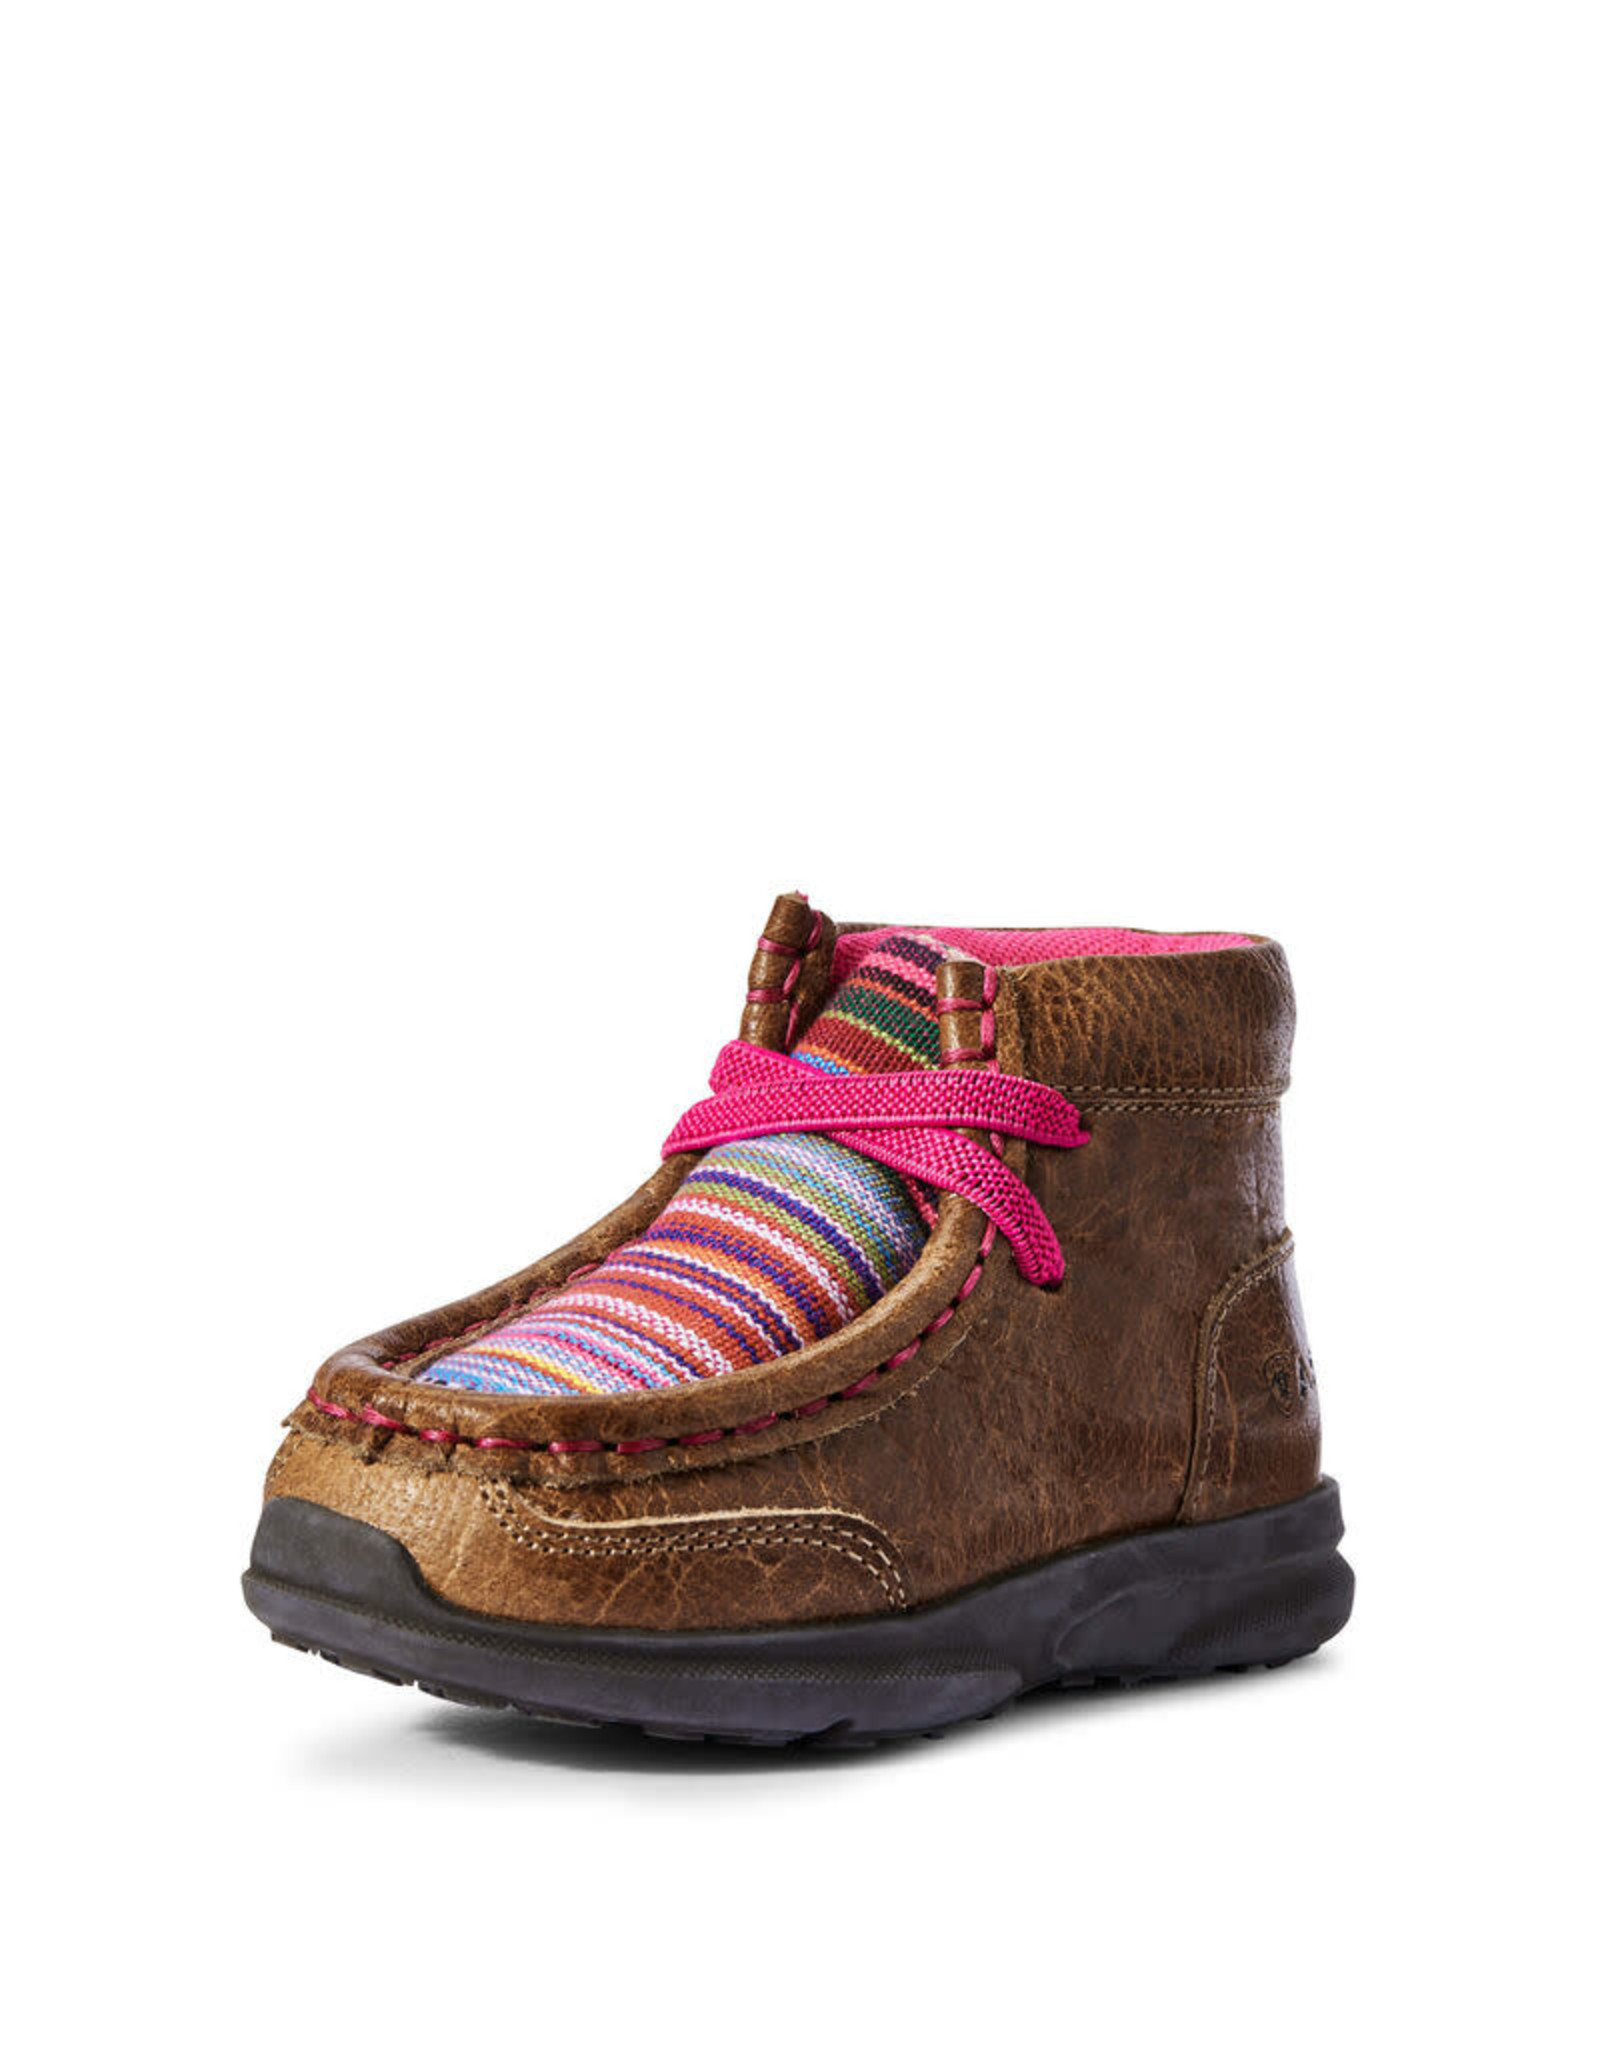 Toddler Ariat Lil Stompers Aurora Boots